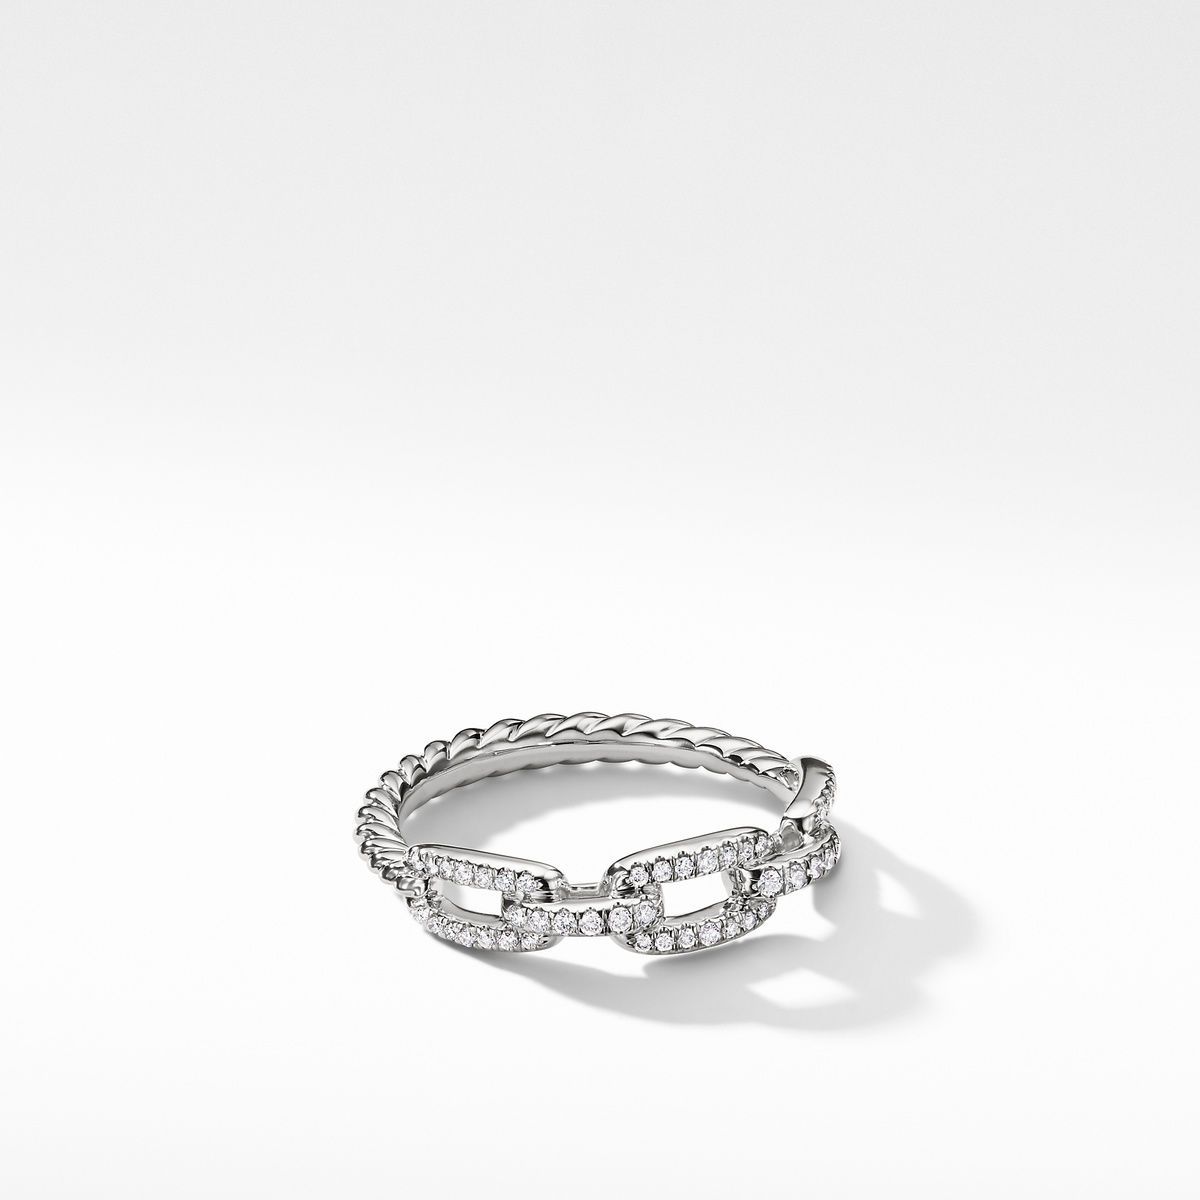 David Yurman Stax Single Row Pave Chain Link Ring with Diamonds in 18K White Gold, 4.5mm | Size 9.5